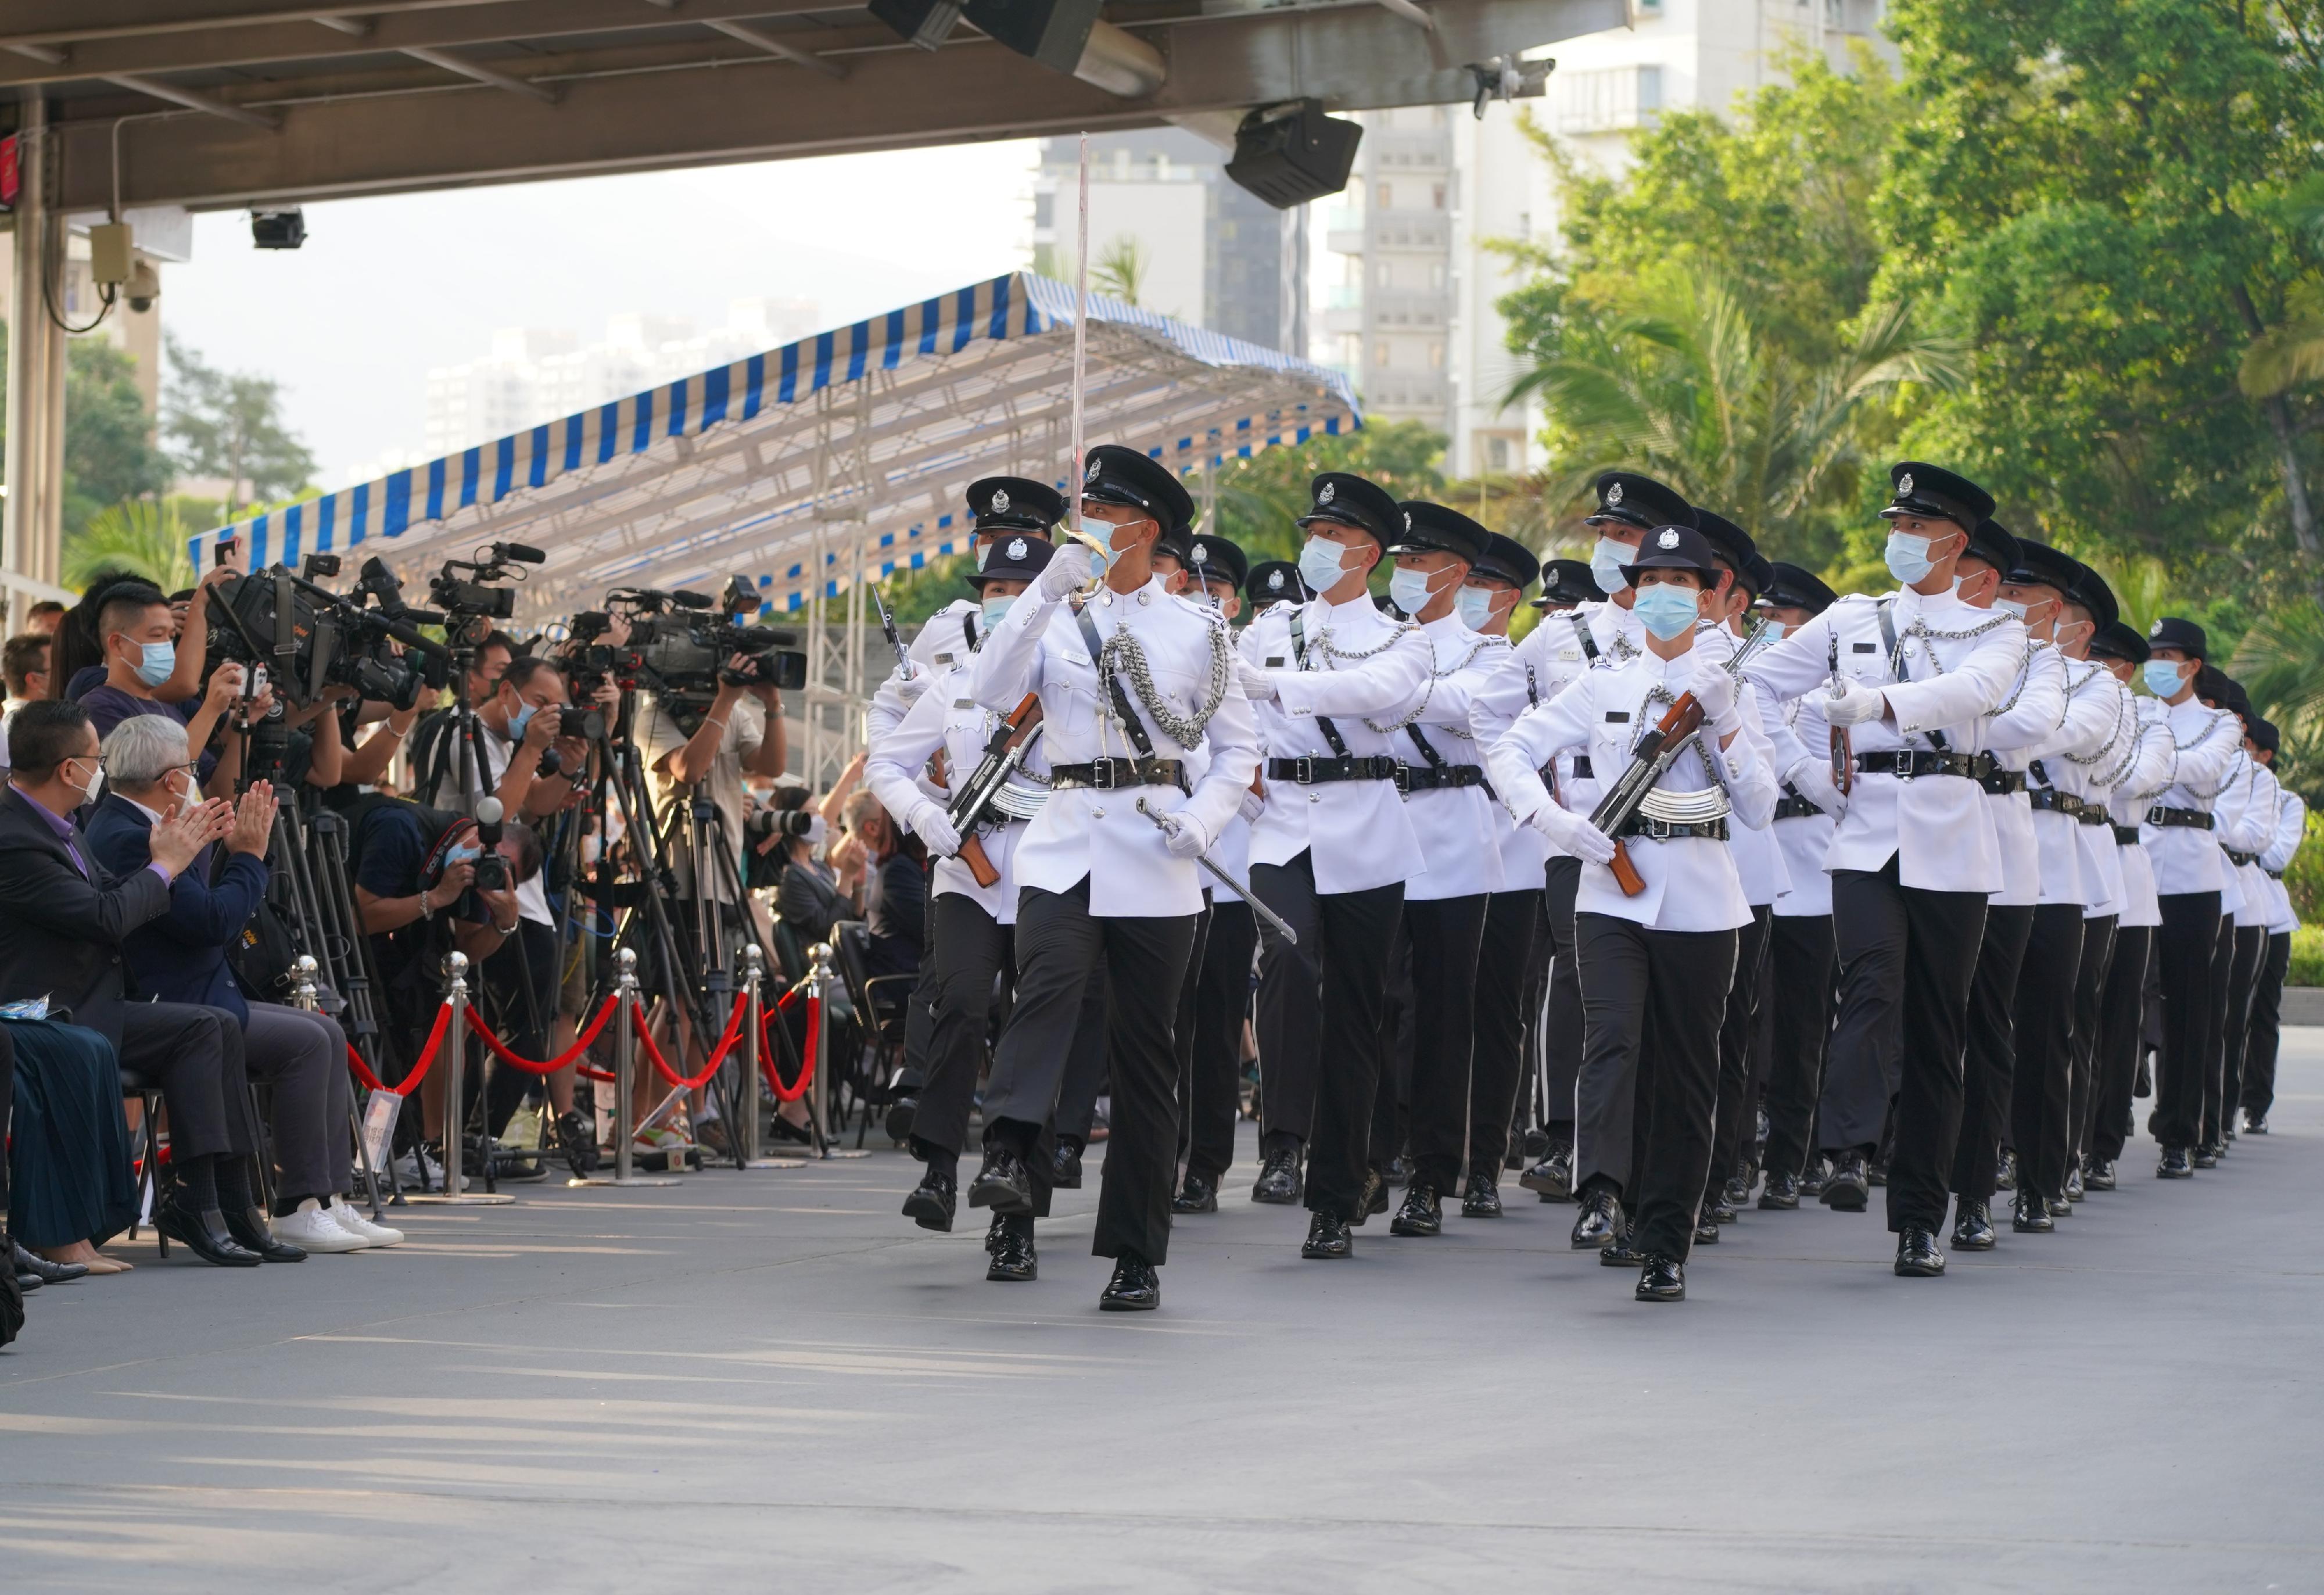 The Immigration Service Institute of Training and Development held an Open Day today (October 29). Photo shows the Departmental Contingent showing Chinese-style foot drill to members of the public.